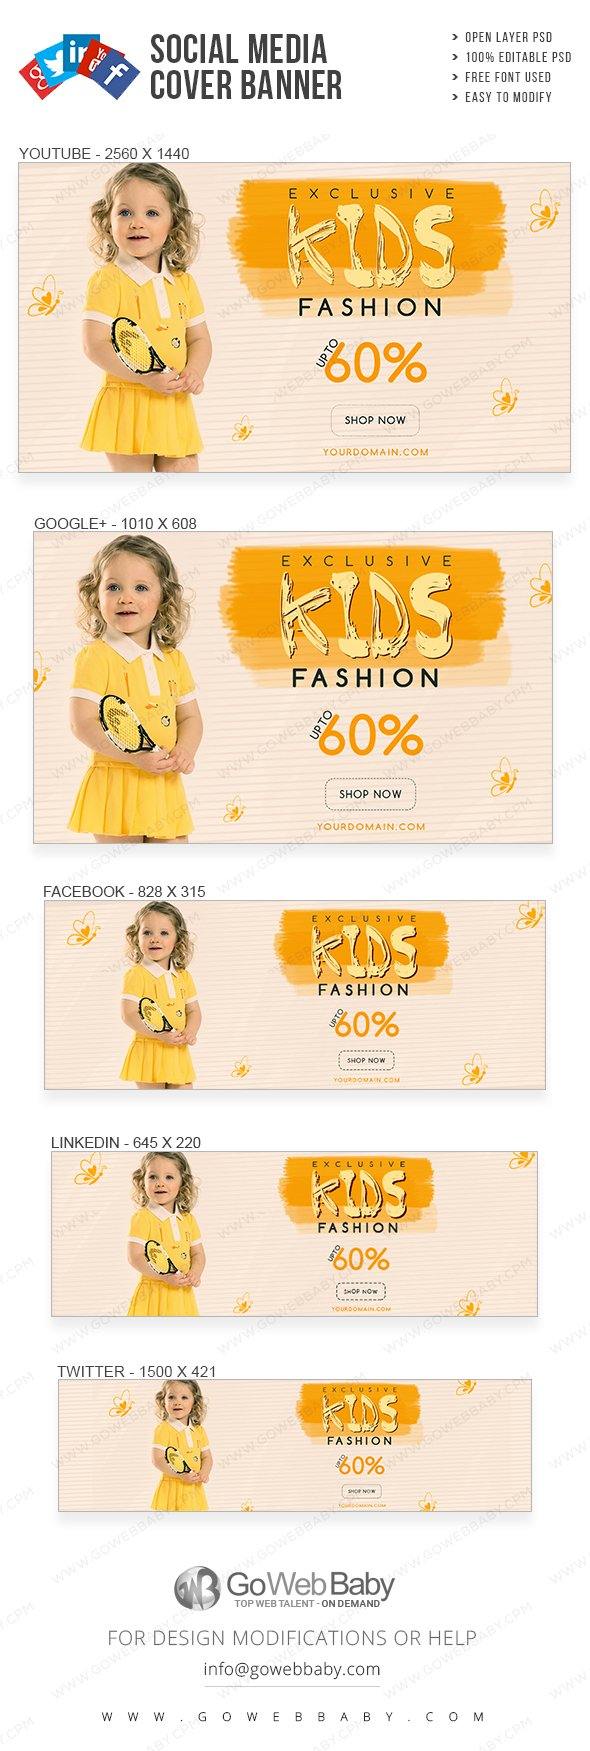 Social Media Cover Banner - Exclusive Kids Fashion For Website Marketing - GoWebBaby.Com